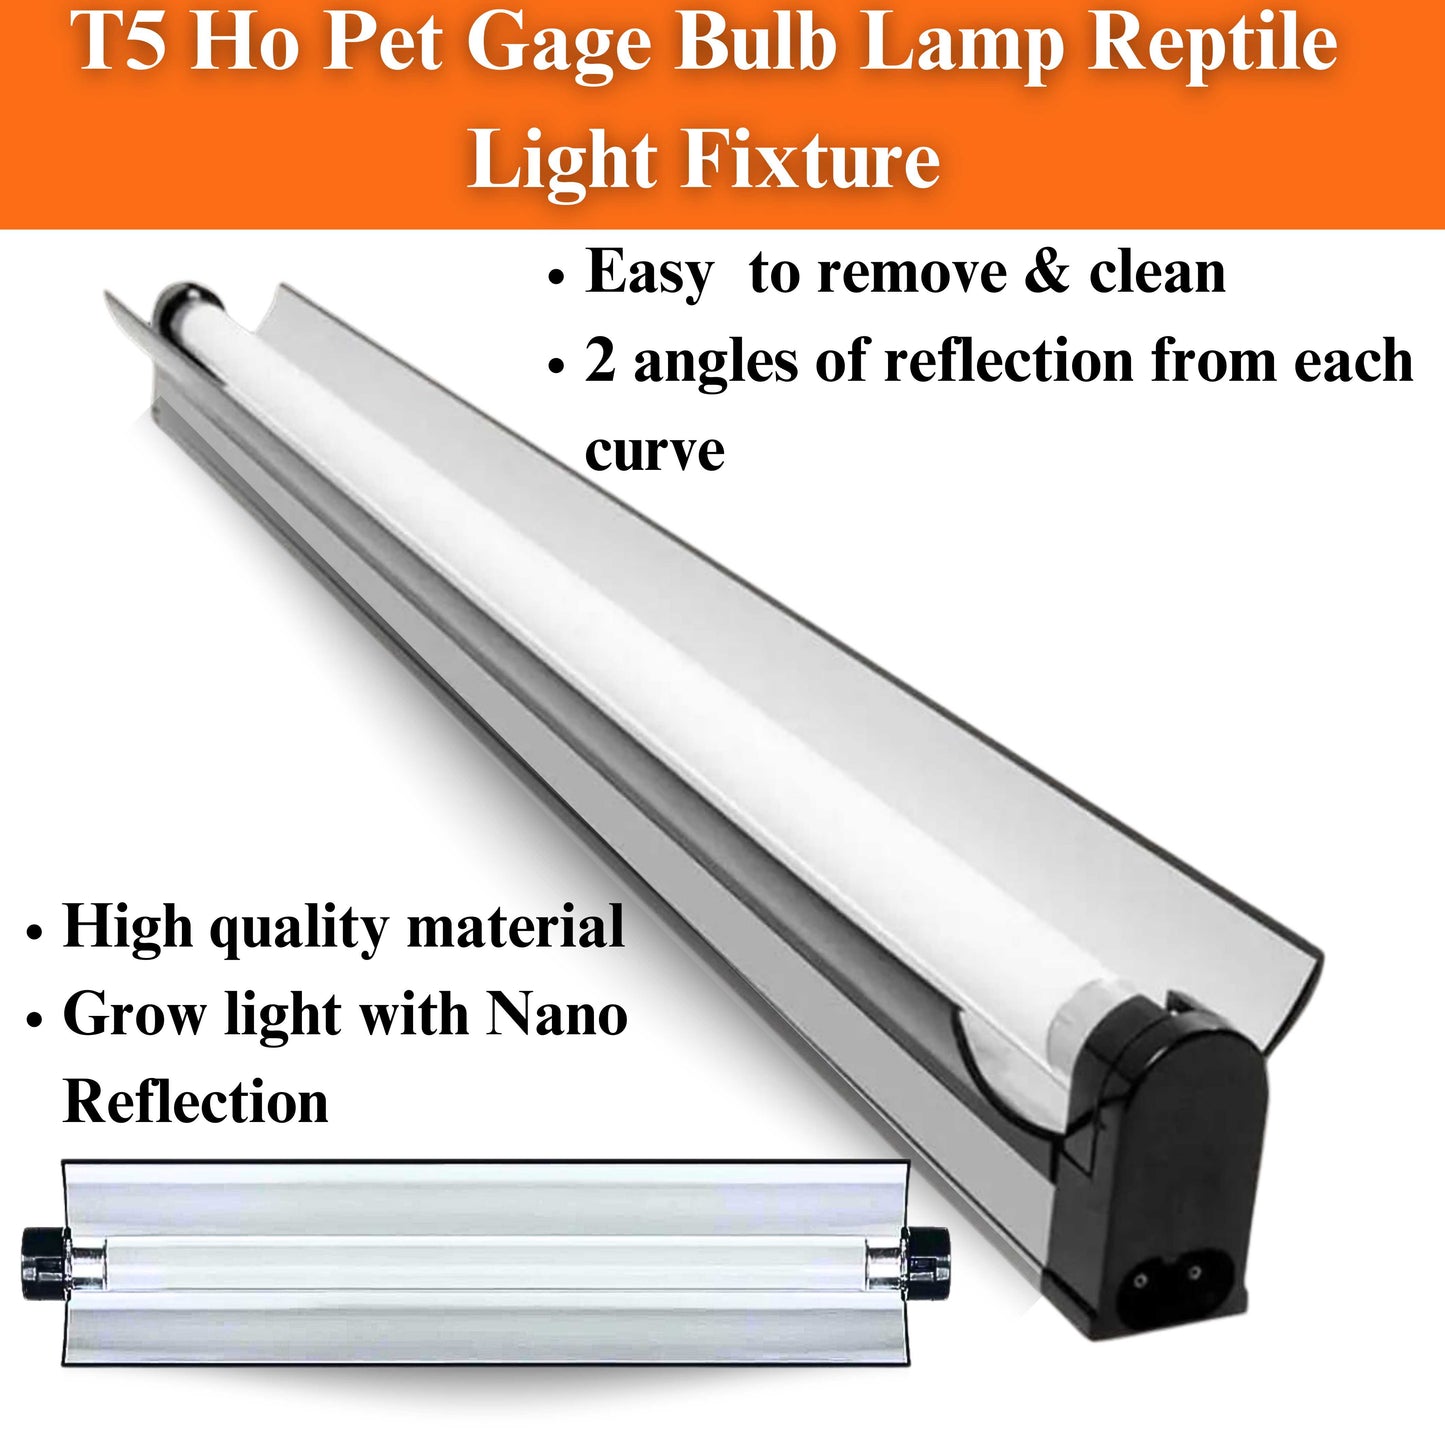 Talis-us Reptile Light Fixture with 10.0 UVB T5 HO Reptile Terrarium Lamp for Bearded Dragon Lizards and Tortoises Talis Us